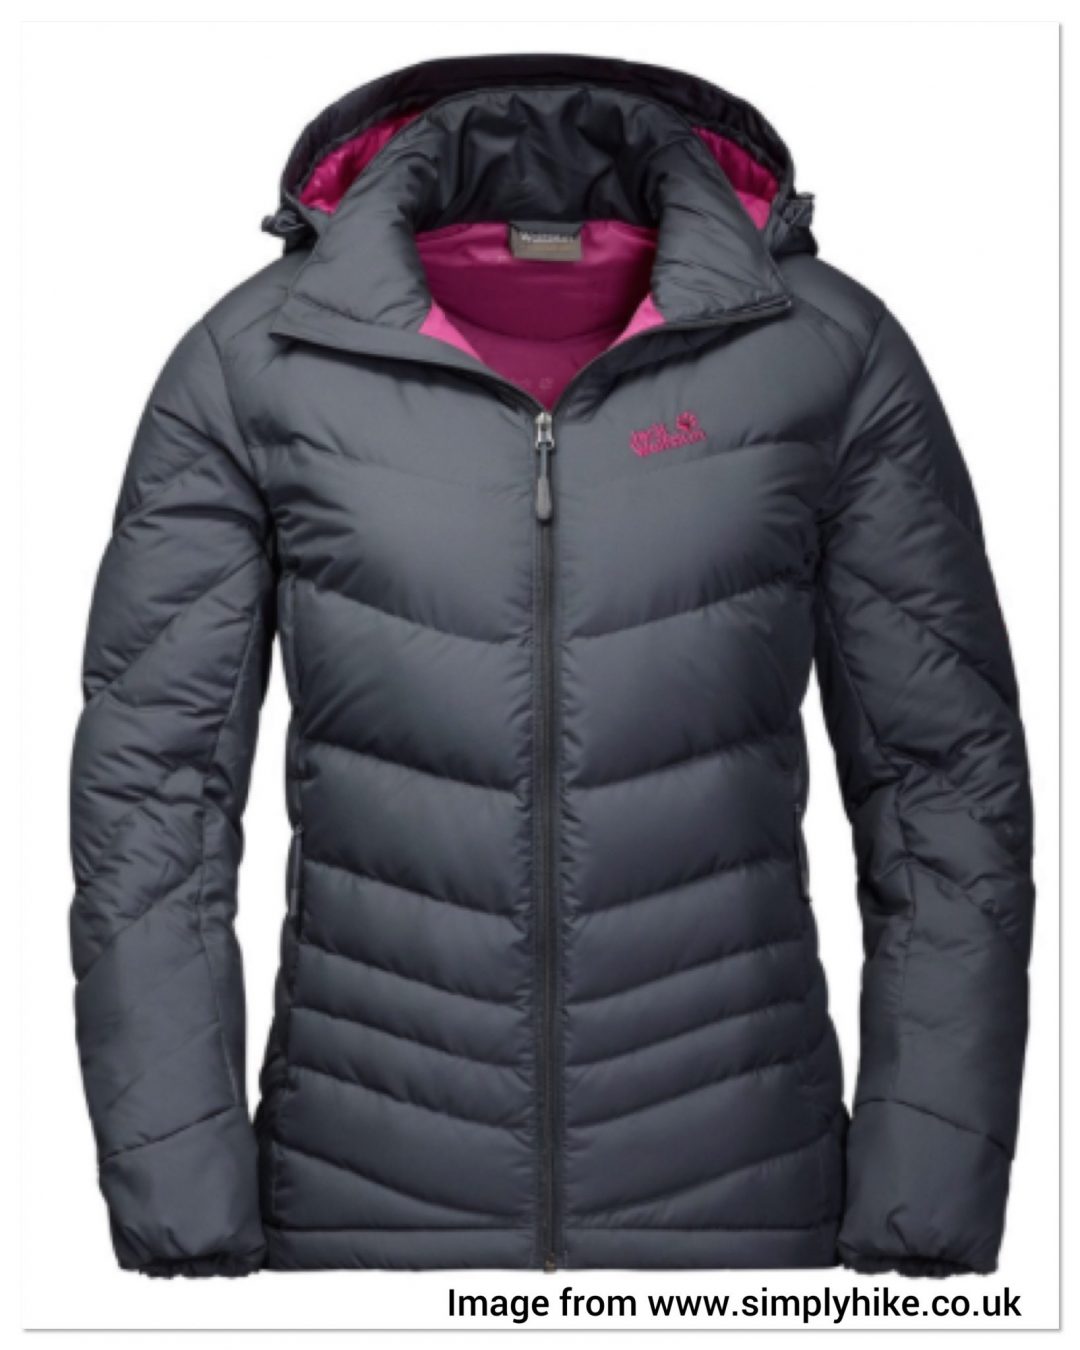 Jack Wolfskin jacket from Simplyhike.co.uk a warm winter jacket for school run, hill walks and mummy life padded jacket